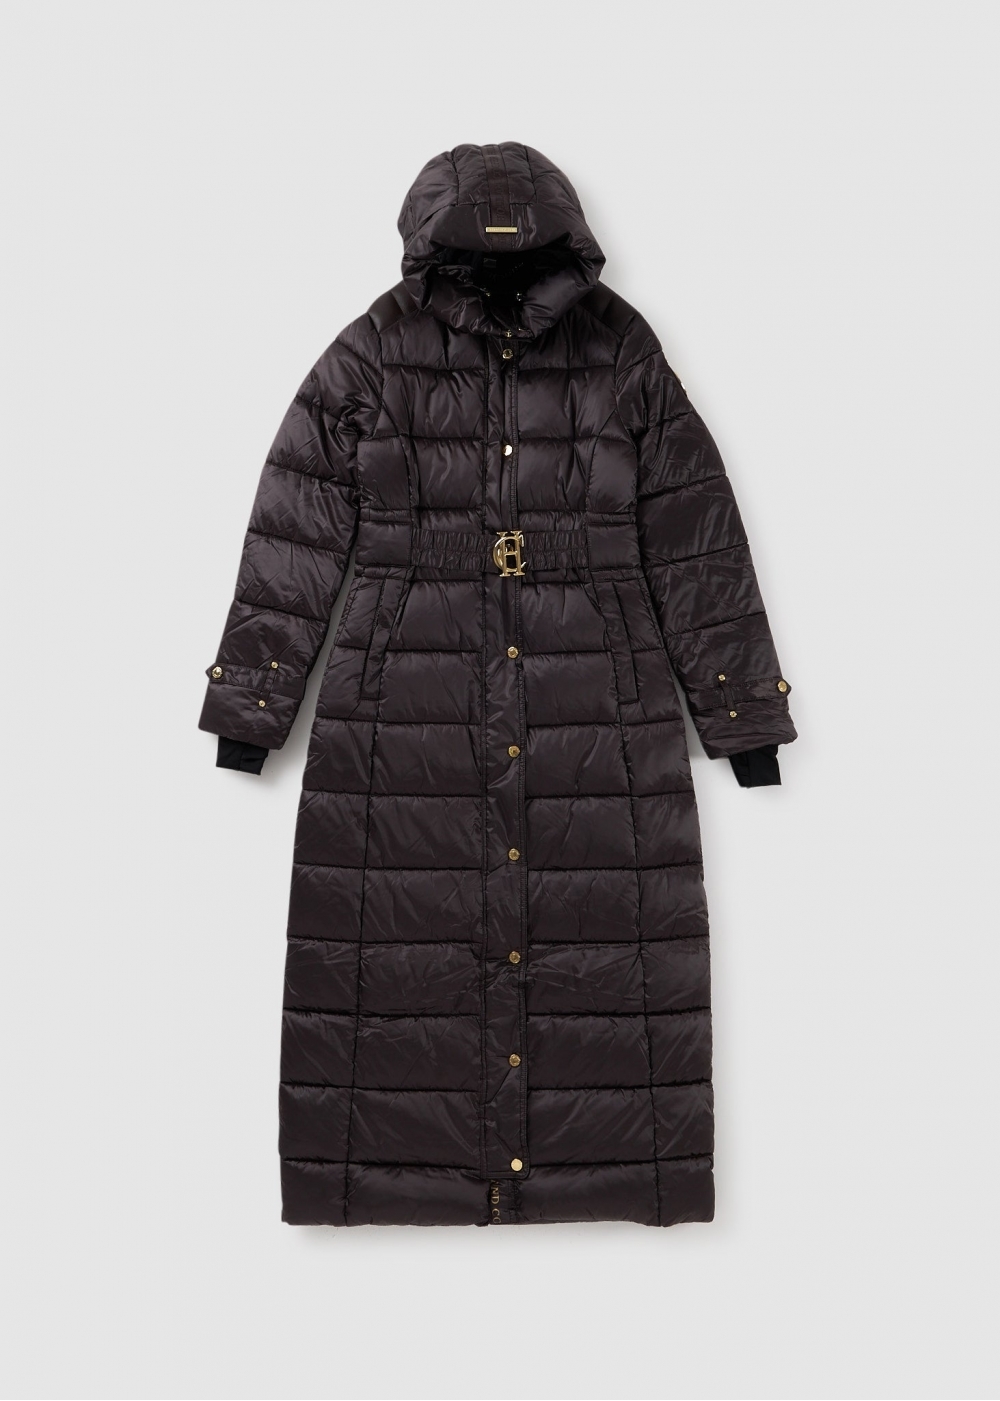 Holland Cooper Womens Arosa Long Puffer Coat With Hood In Chocolate